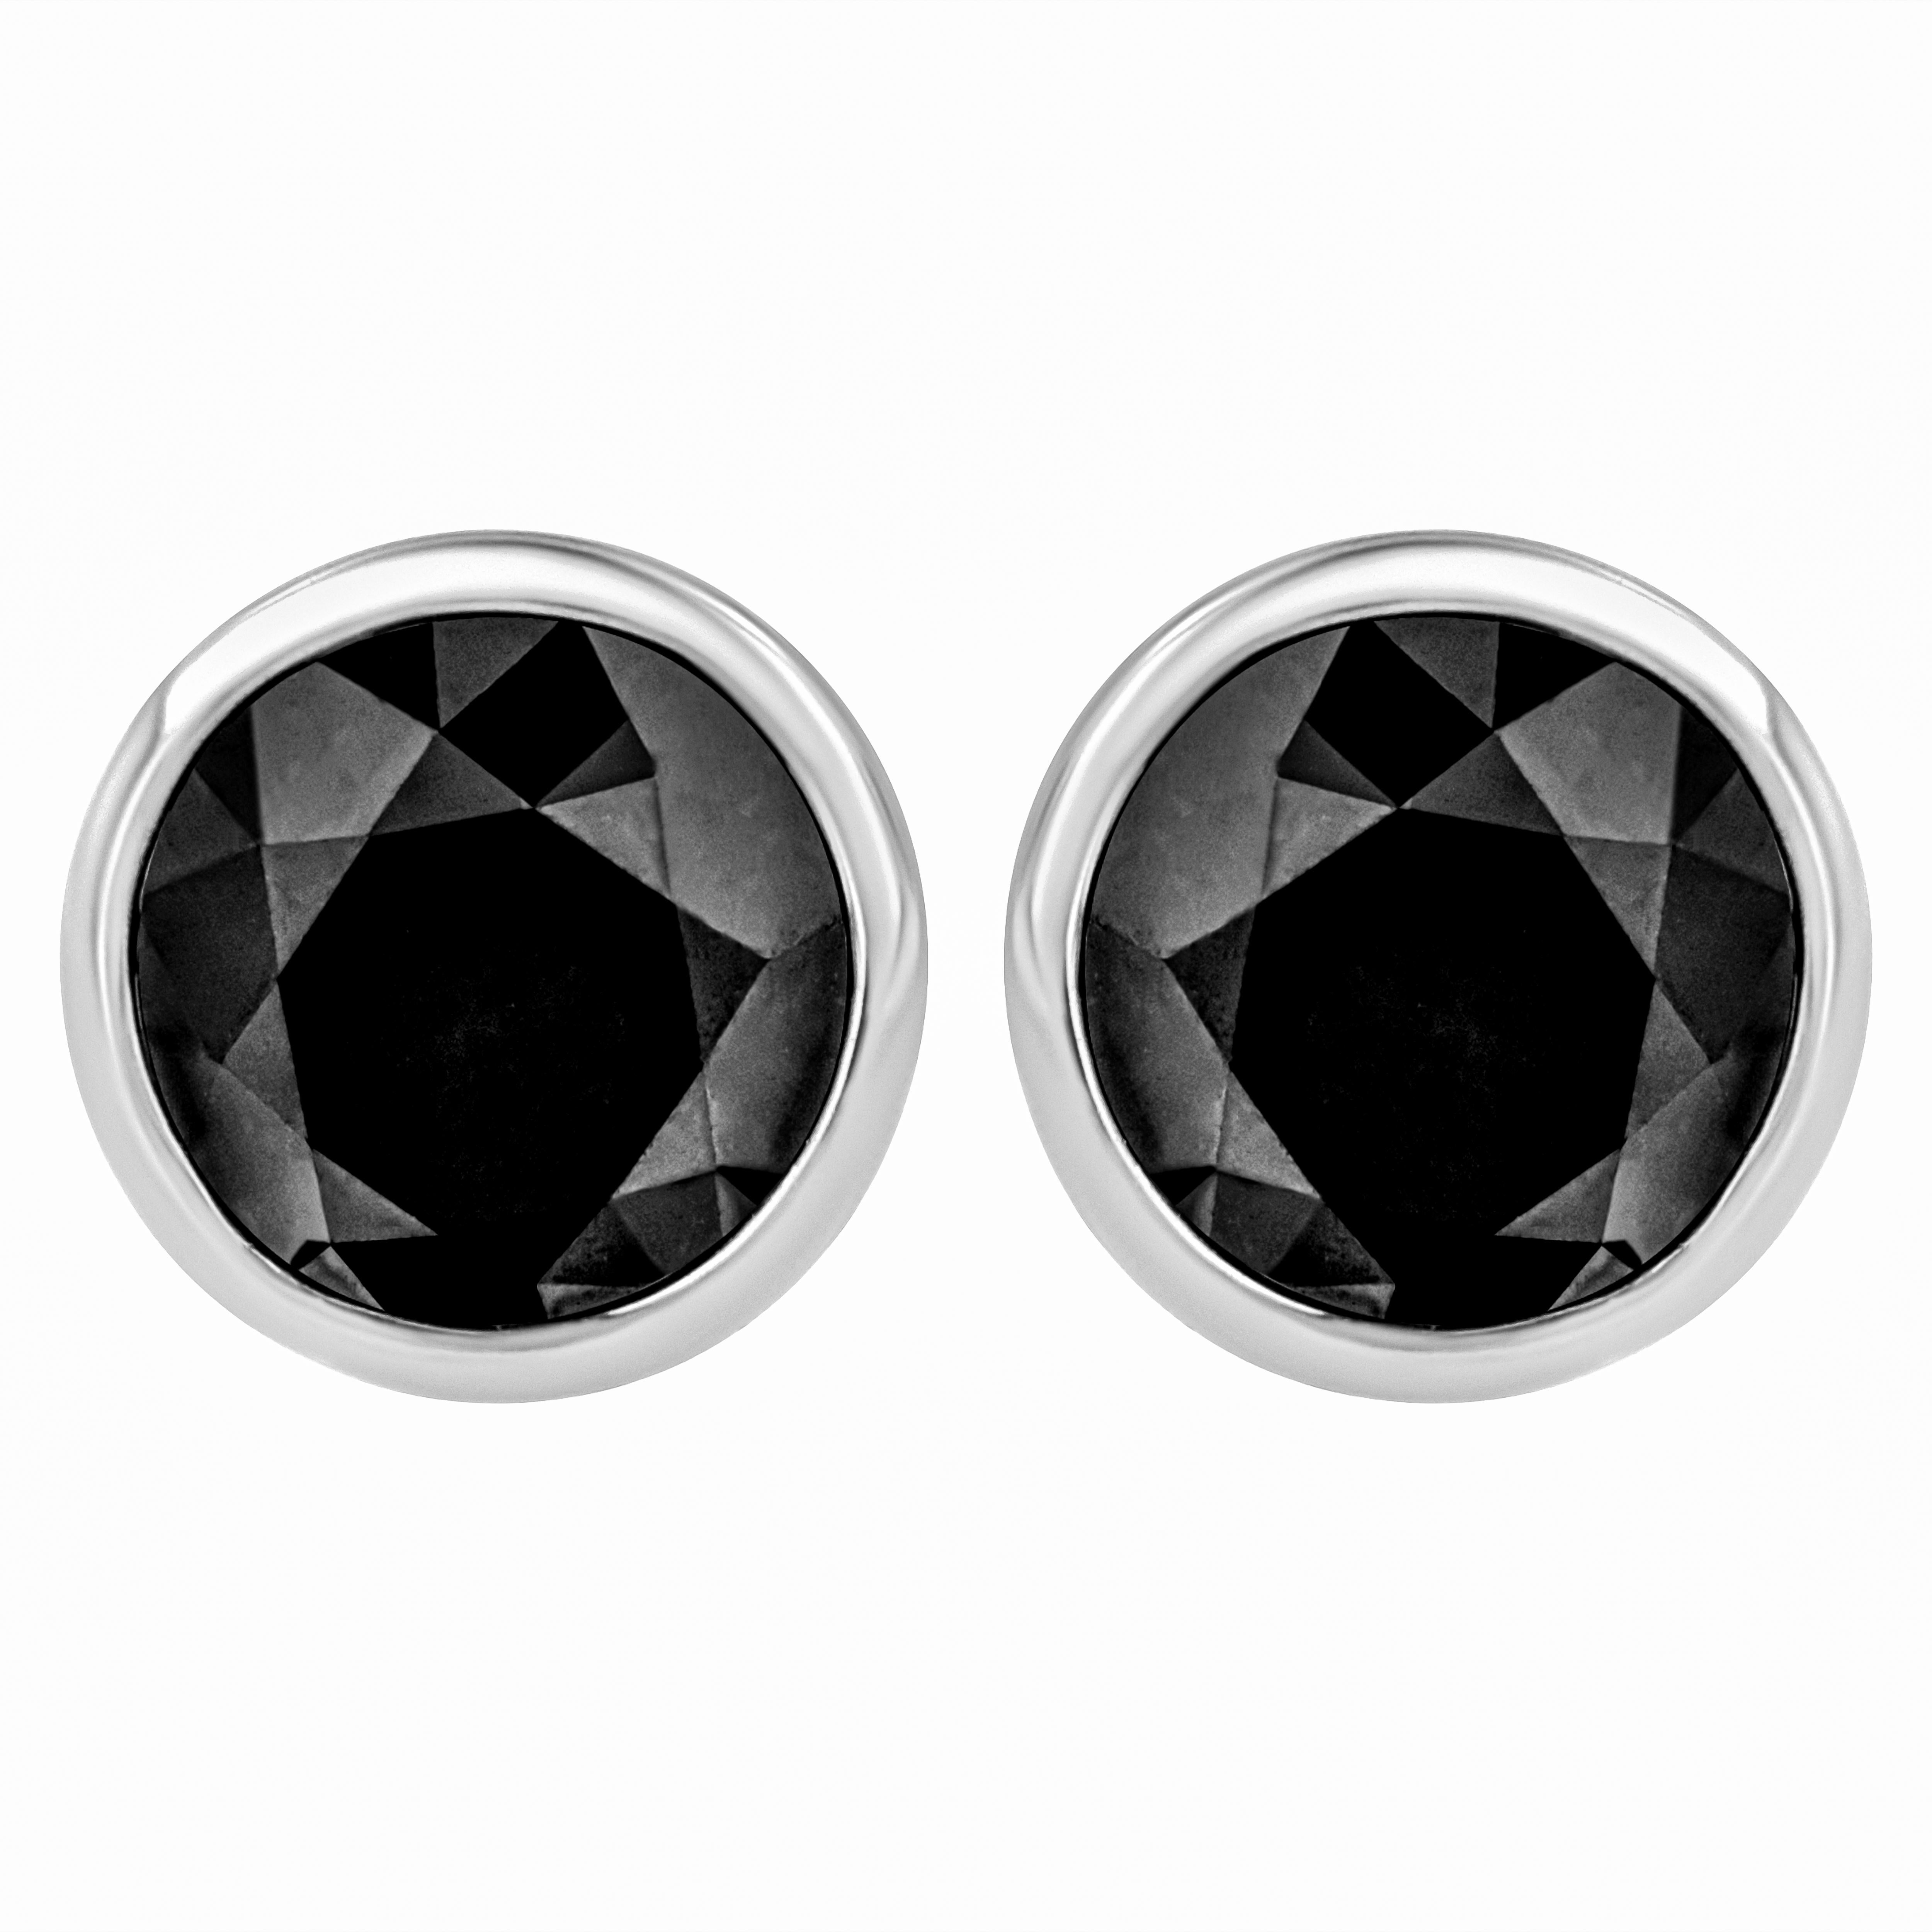 Elegant and timeless, these gorgeous .925 sterling silver solitaire stud earrings feature bold and beautiful heat treated, color enhanced black diamonds in a bezel setting. The earrings feature screwback closures. The notched posts and friction